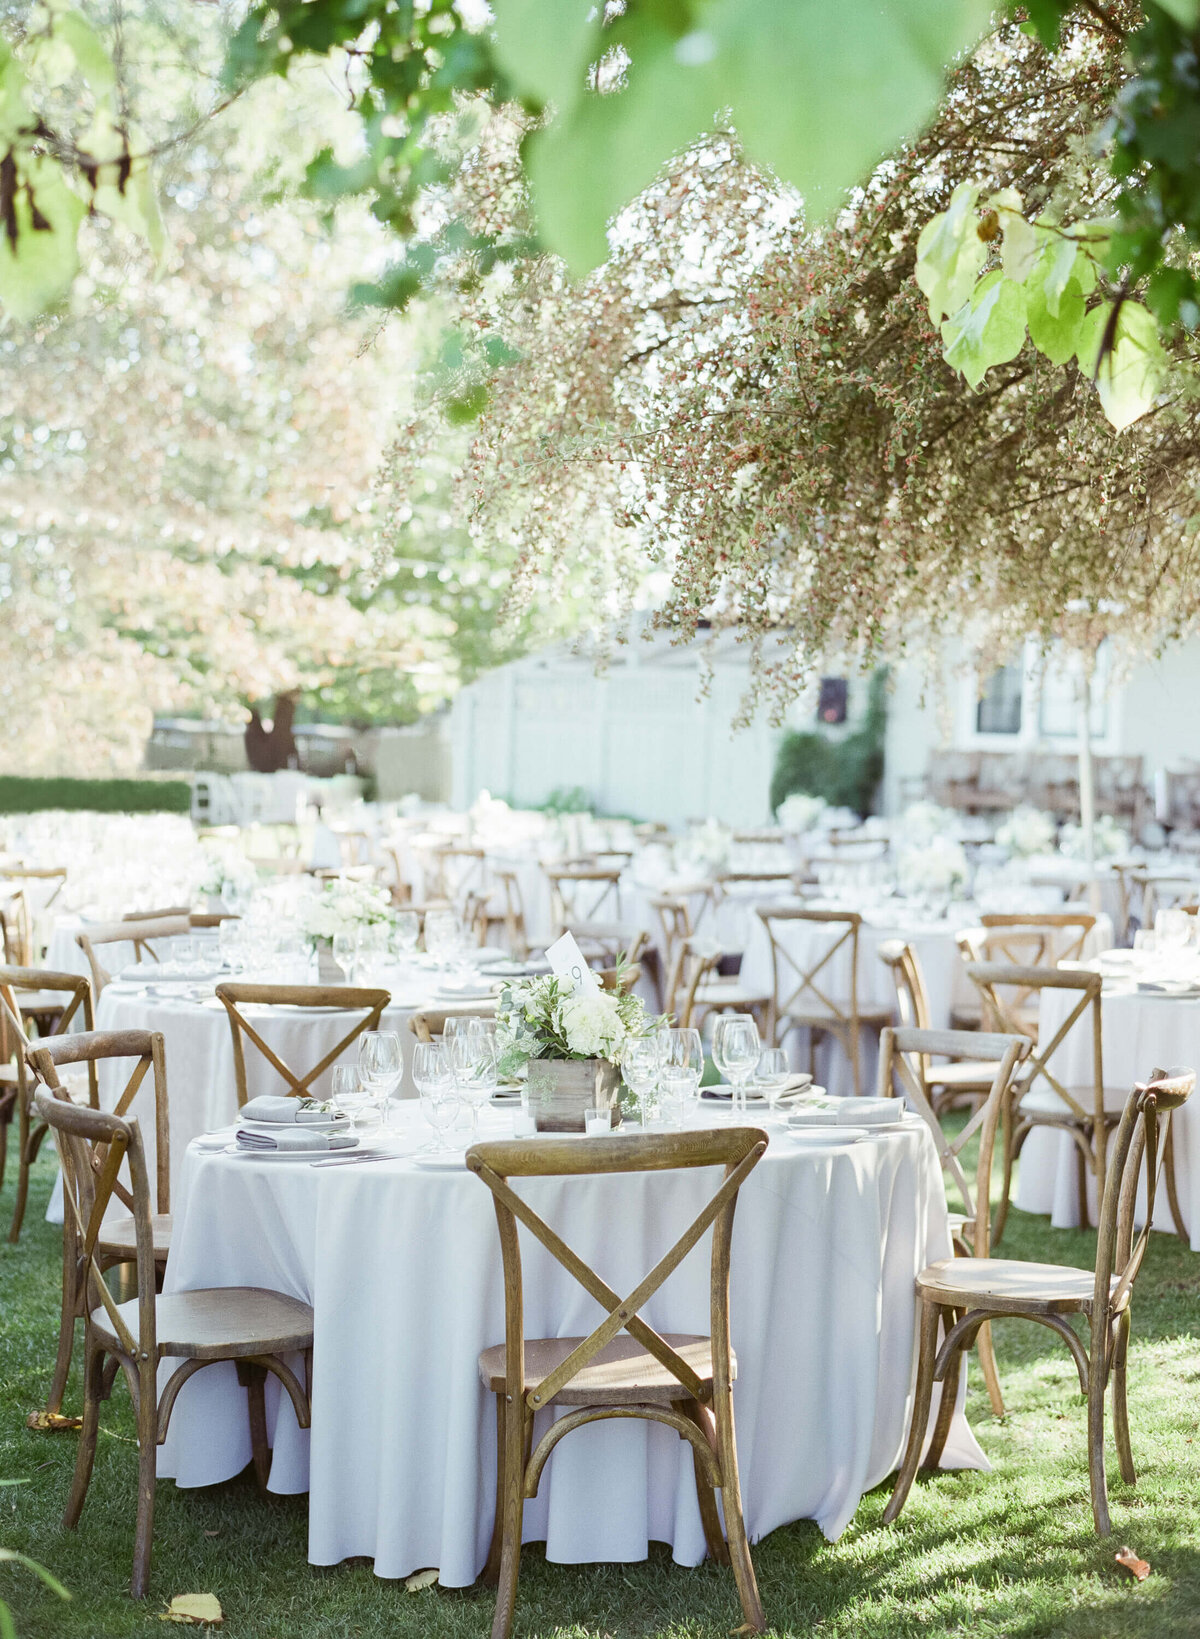 Exquisite arrangement of outdoor wedding reception tables with vintage wooden chairs and white tablecloths beside a beautiful scenery of green garden floor and white flowers.